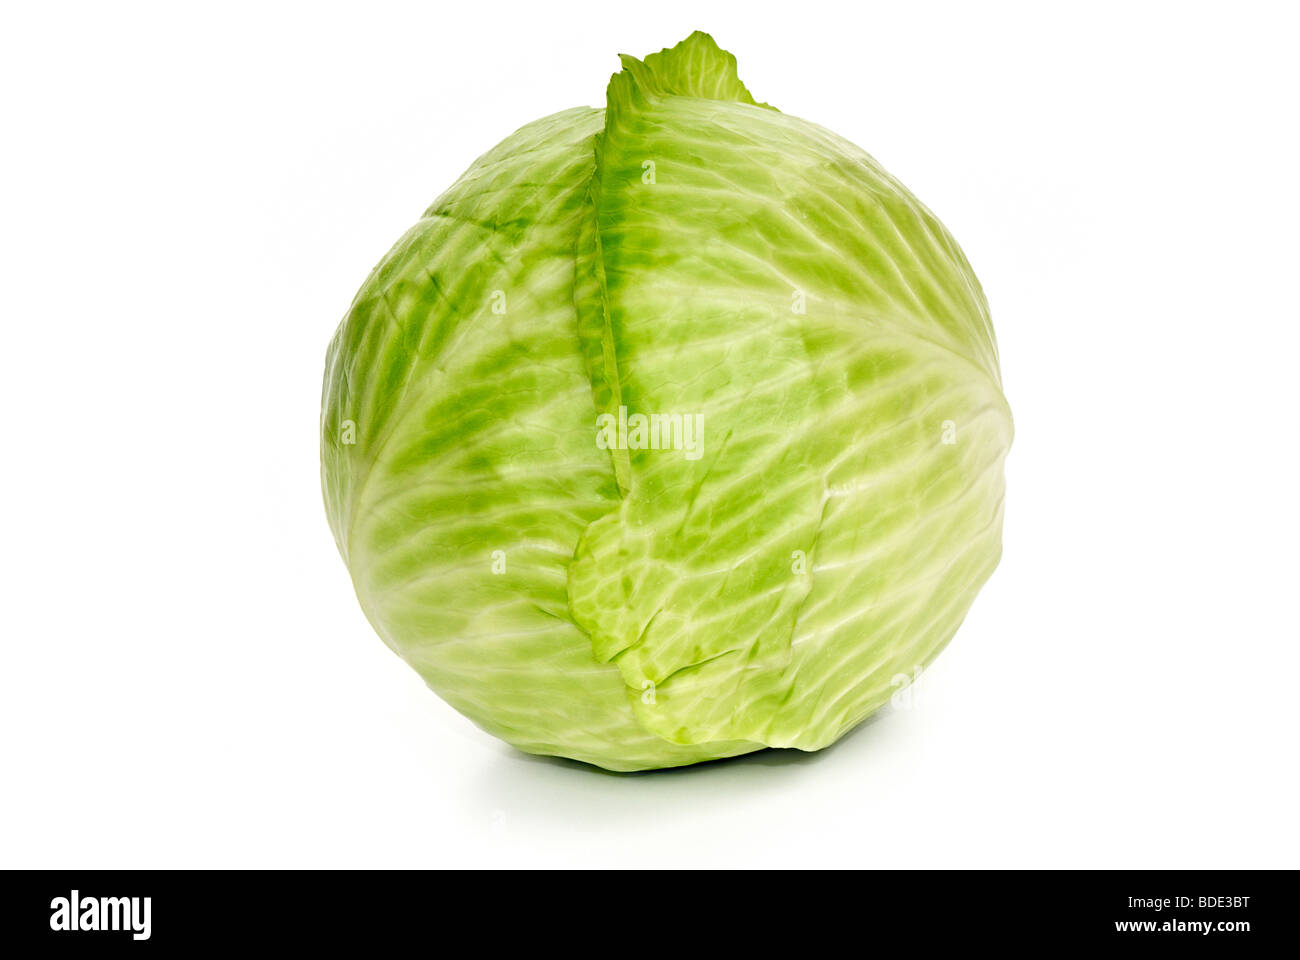 A head of cabbage isolated on a white background Stock Photo